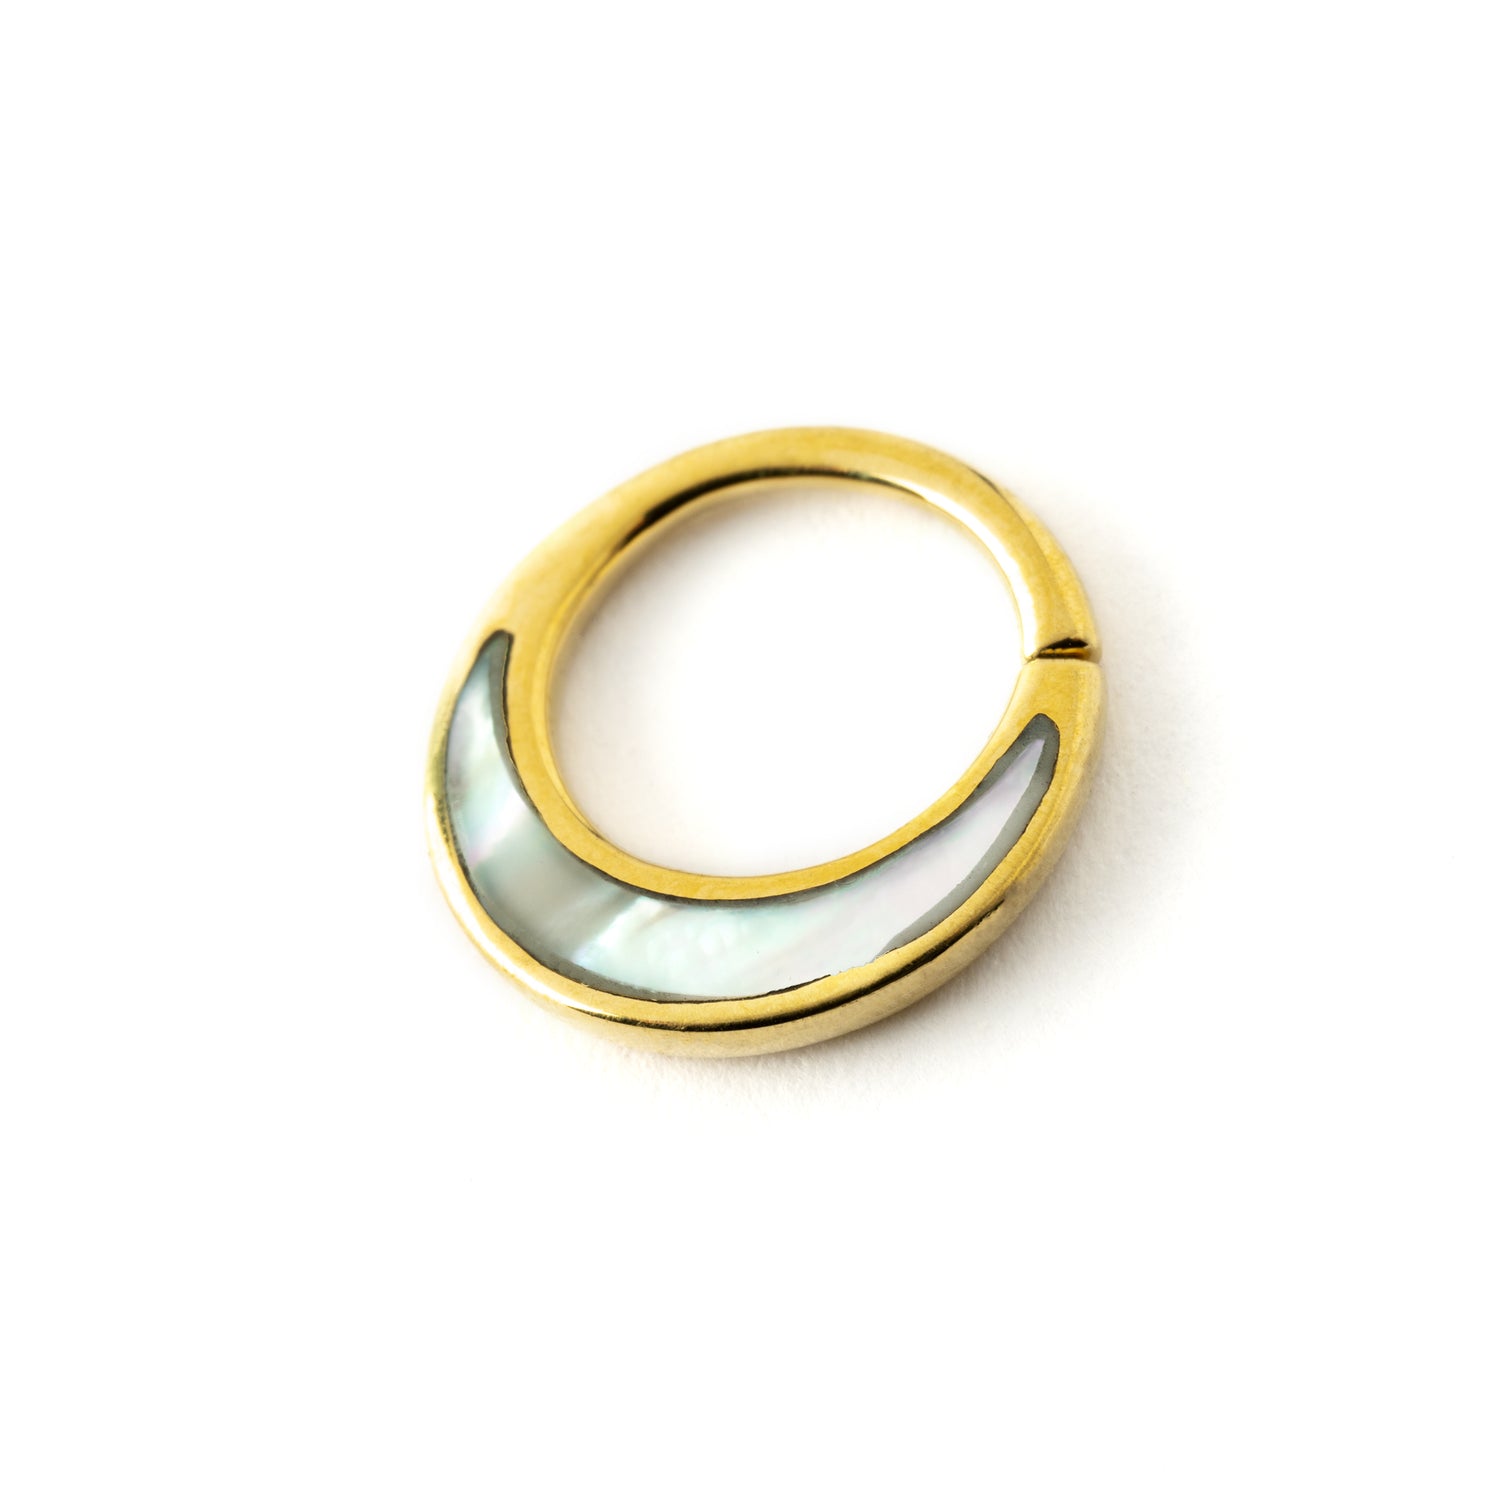 Golden brass septum piercing ring with mother of pearl inlay right side view